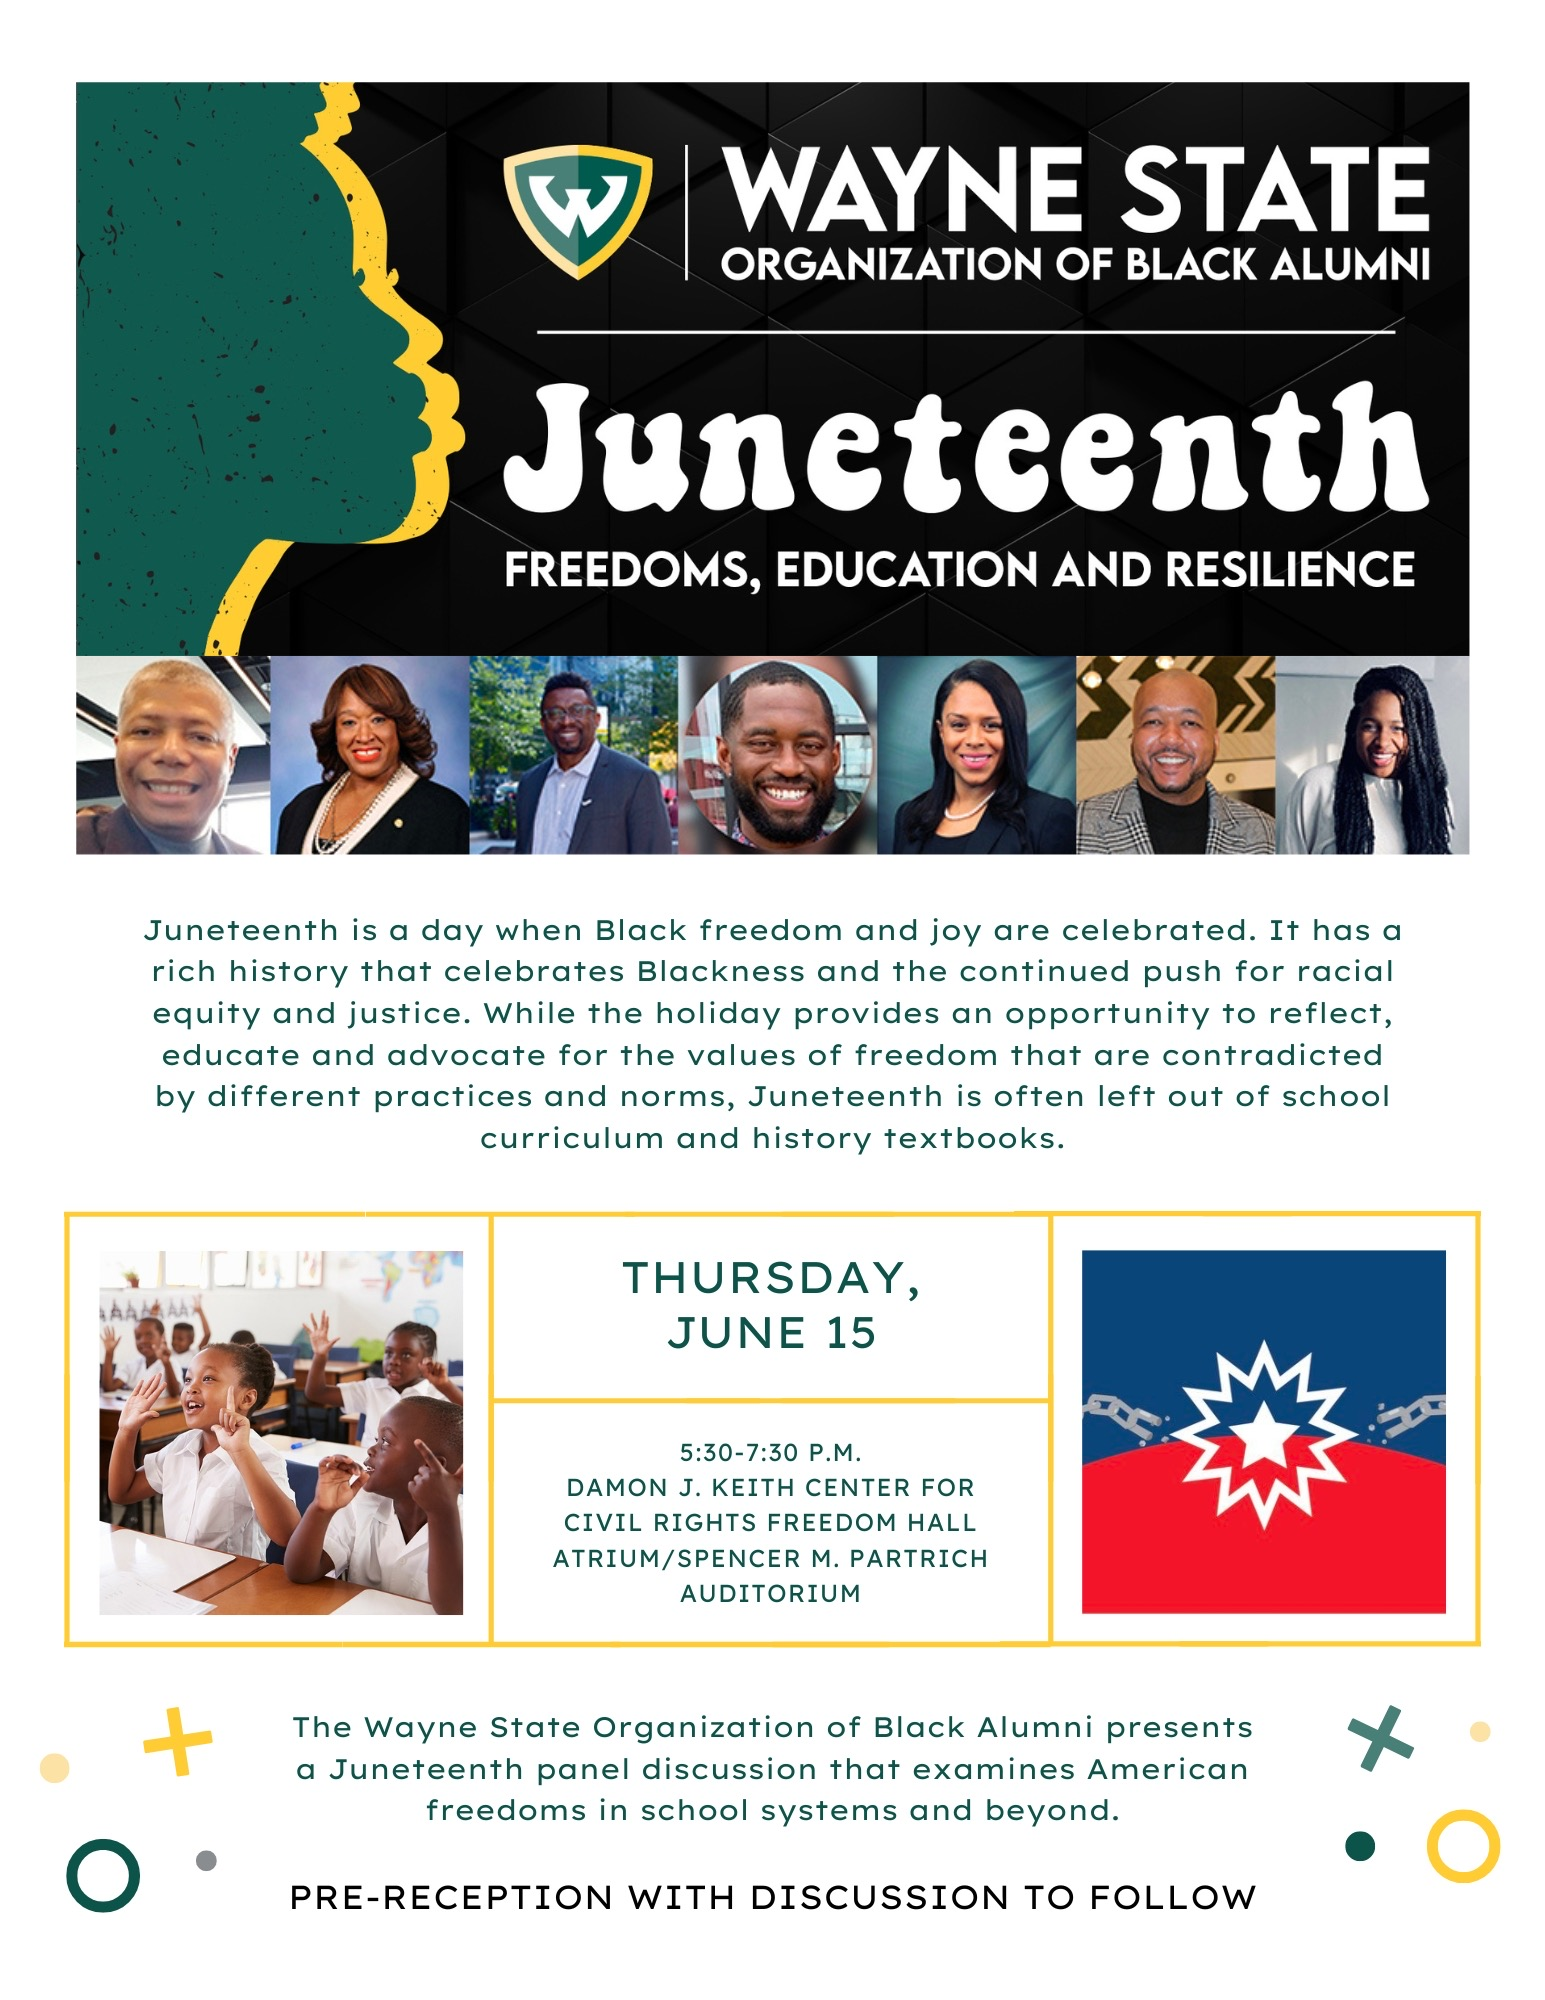 Juneteenth: Freedoms, Education and Resilience